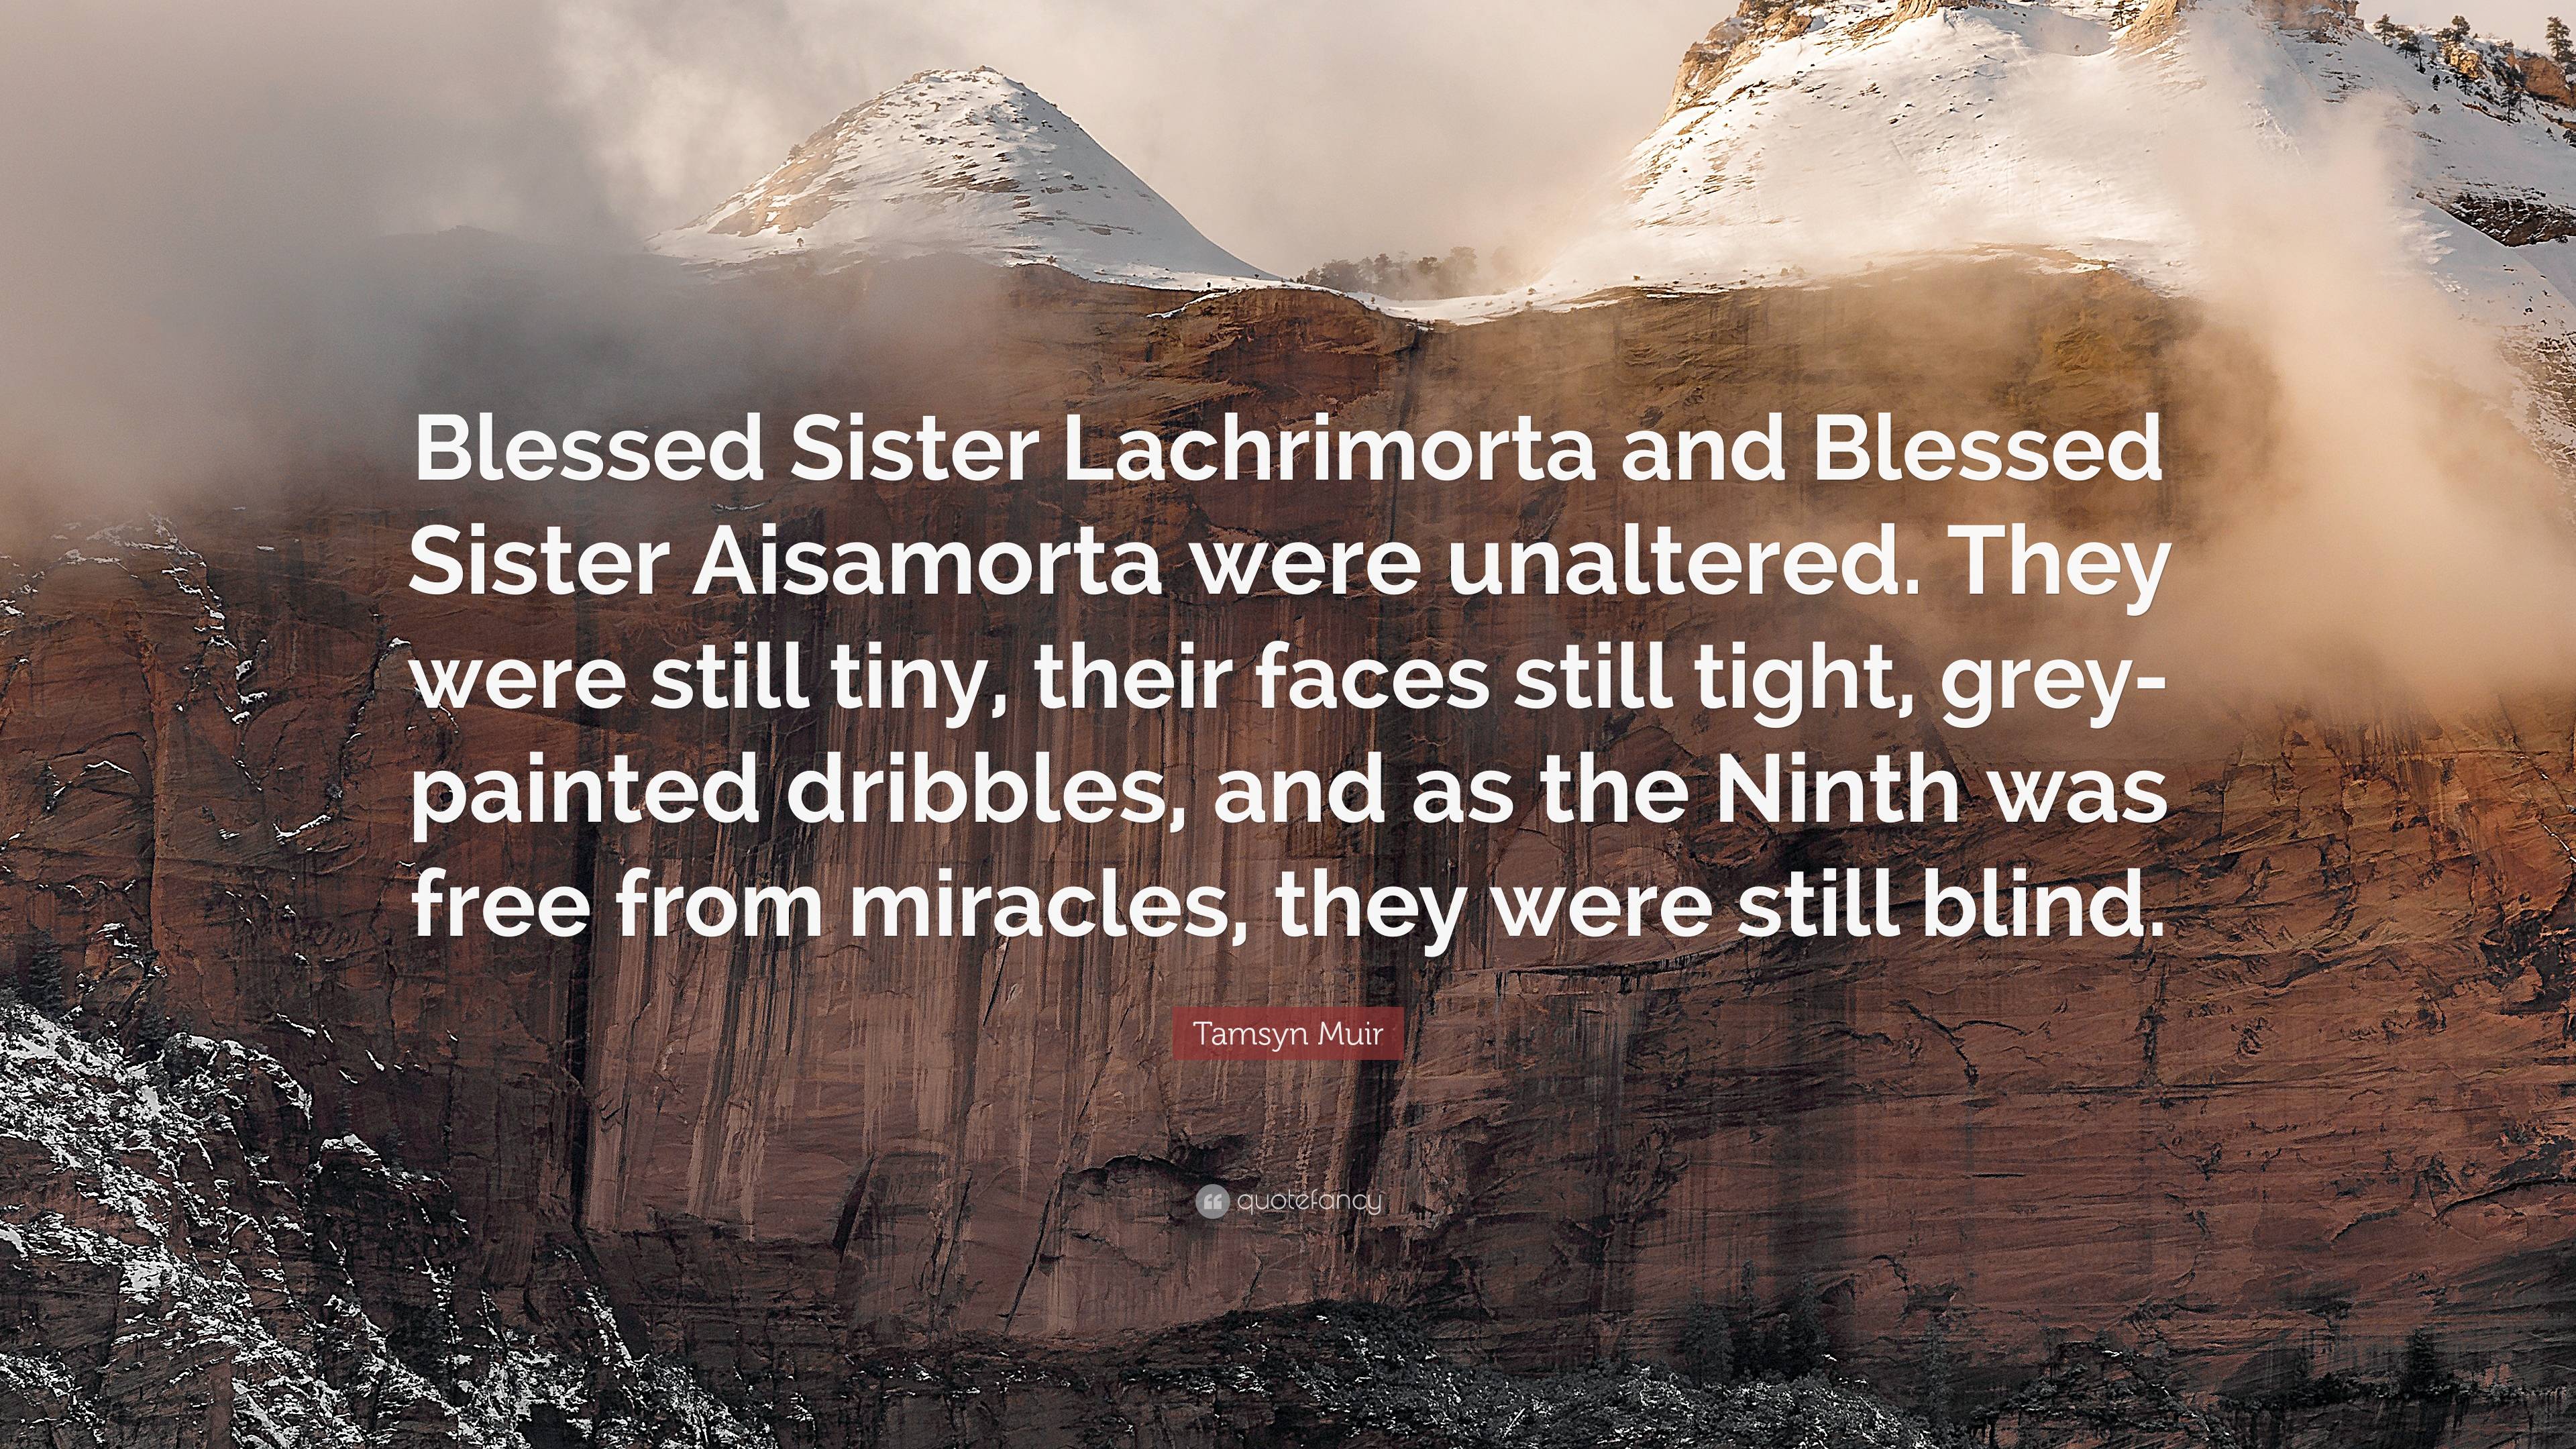 https://quotefancy.com/media/wallpaper/3840x2160/7277644-Tamsyn-Muir-Quote-Blessed-Sister-Lachrimorta-and-Blessed-Sister.jpg